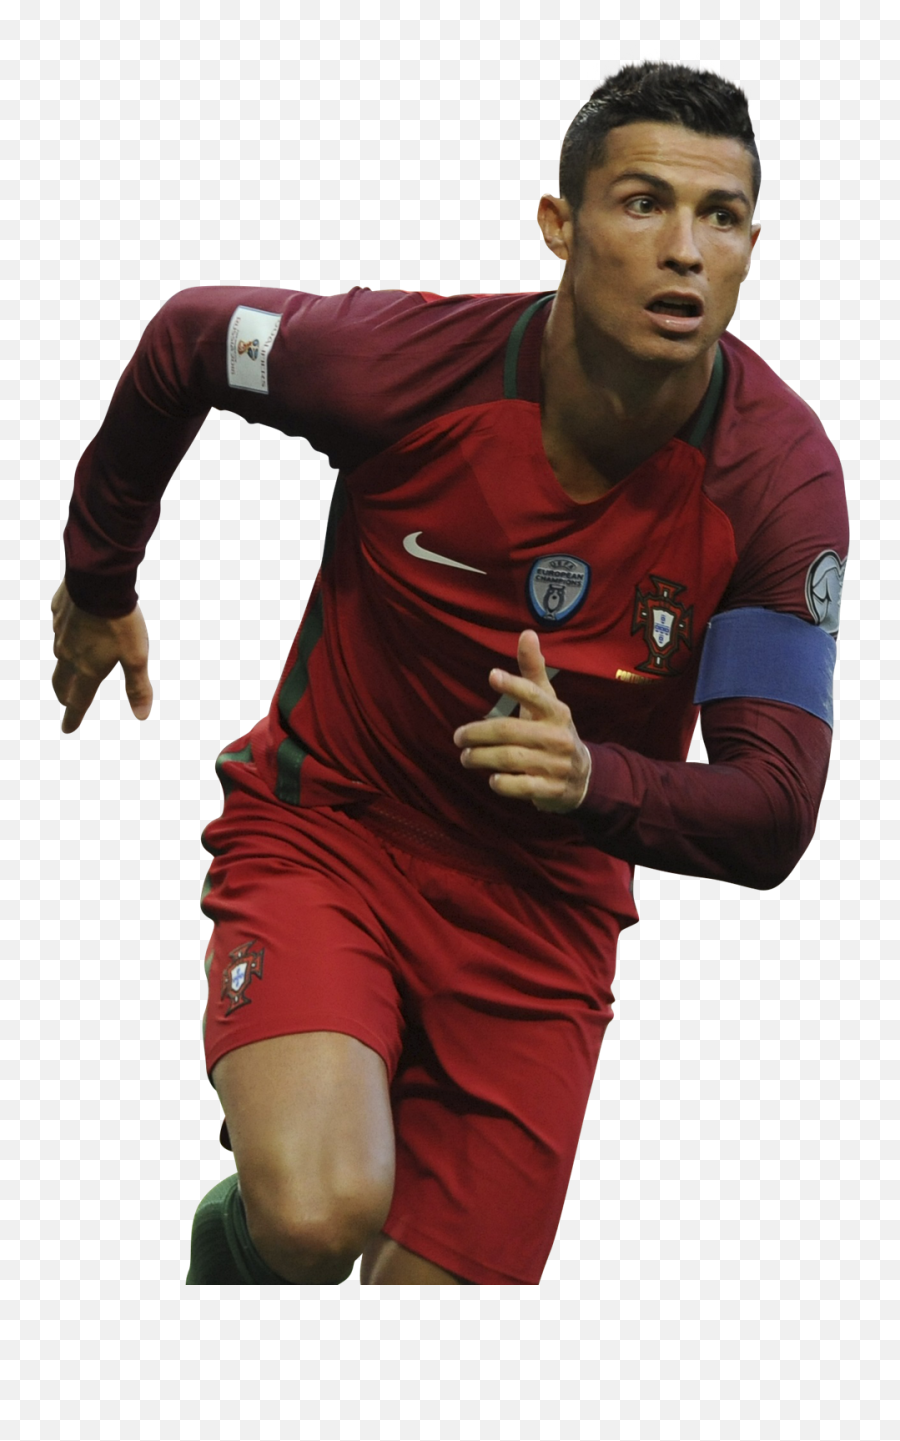 Cristiano Ronaldo Png Www - Imagens Png Cristiano Ronaldo,Cristiano Ronaldo Png